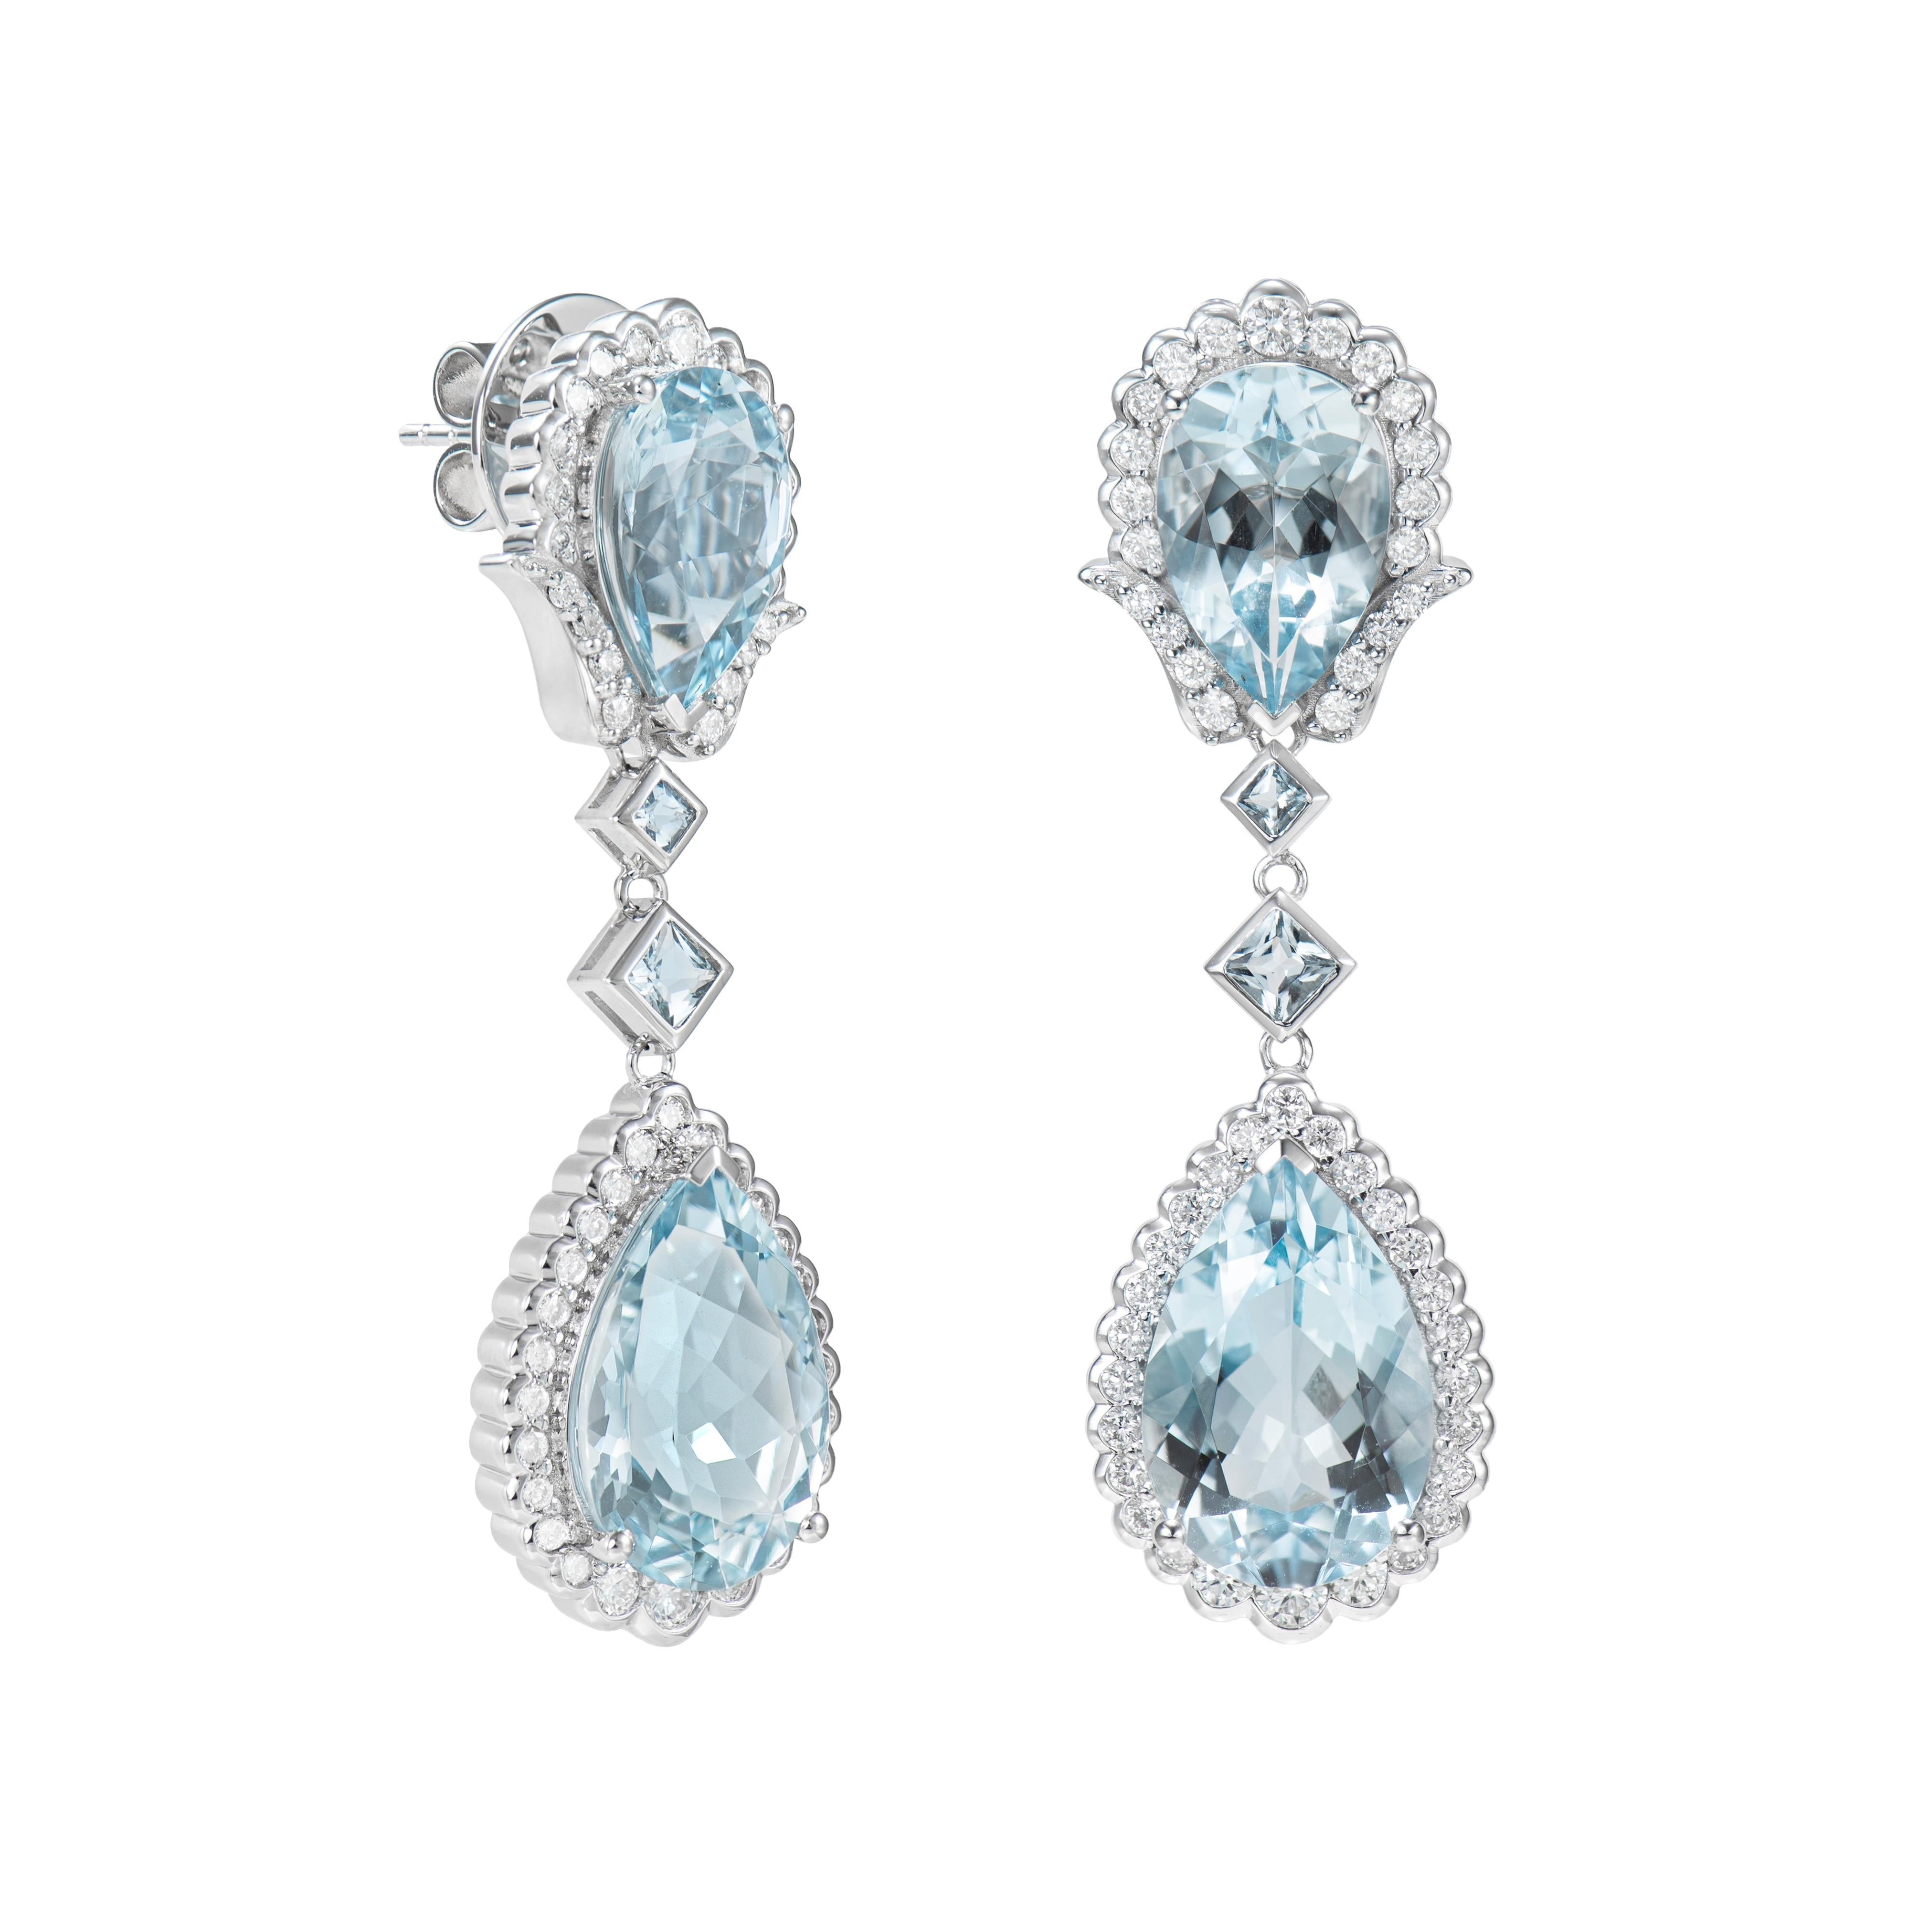 This collection features an array of aquamarines with an icy blue hue that is as cool as it gets! Accented with diamonds these Teardrops Earrings are made in white gold and present a classic yet elegant look. 

Aquamarine and White Diamond Teardrops